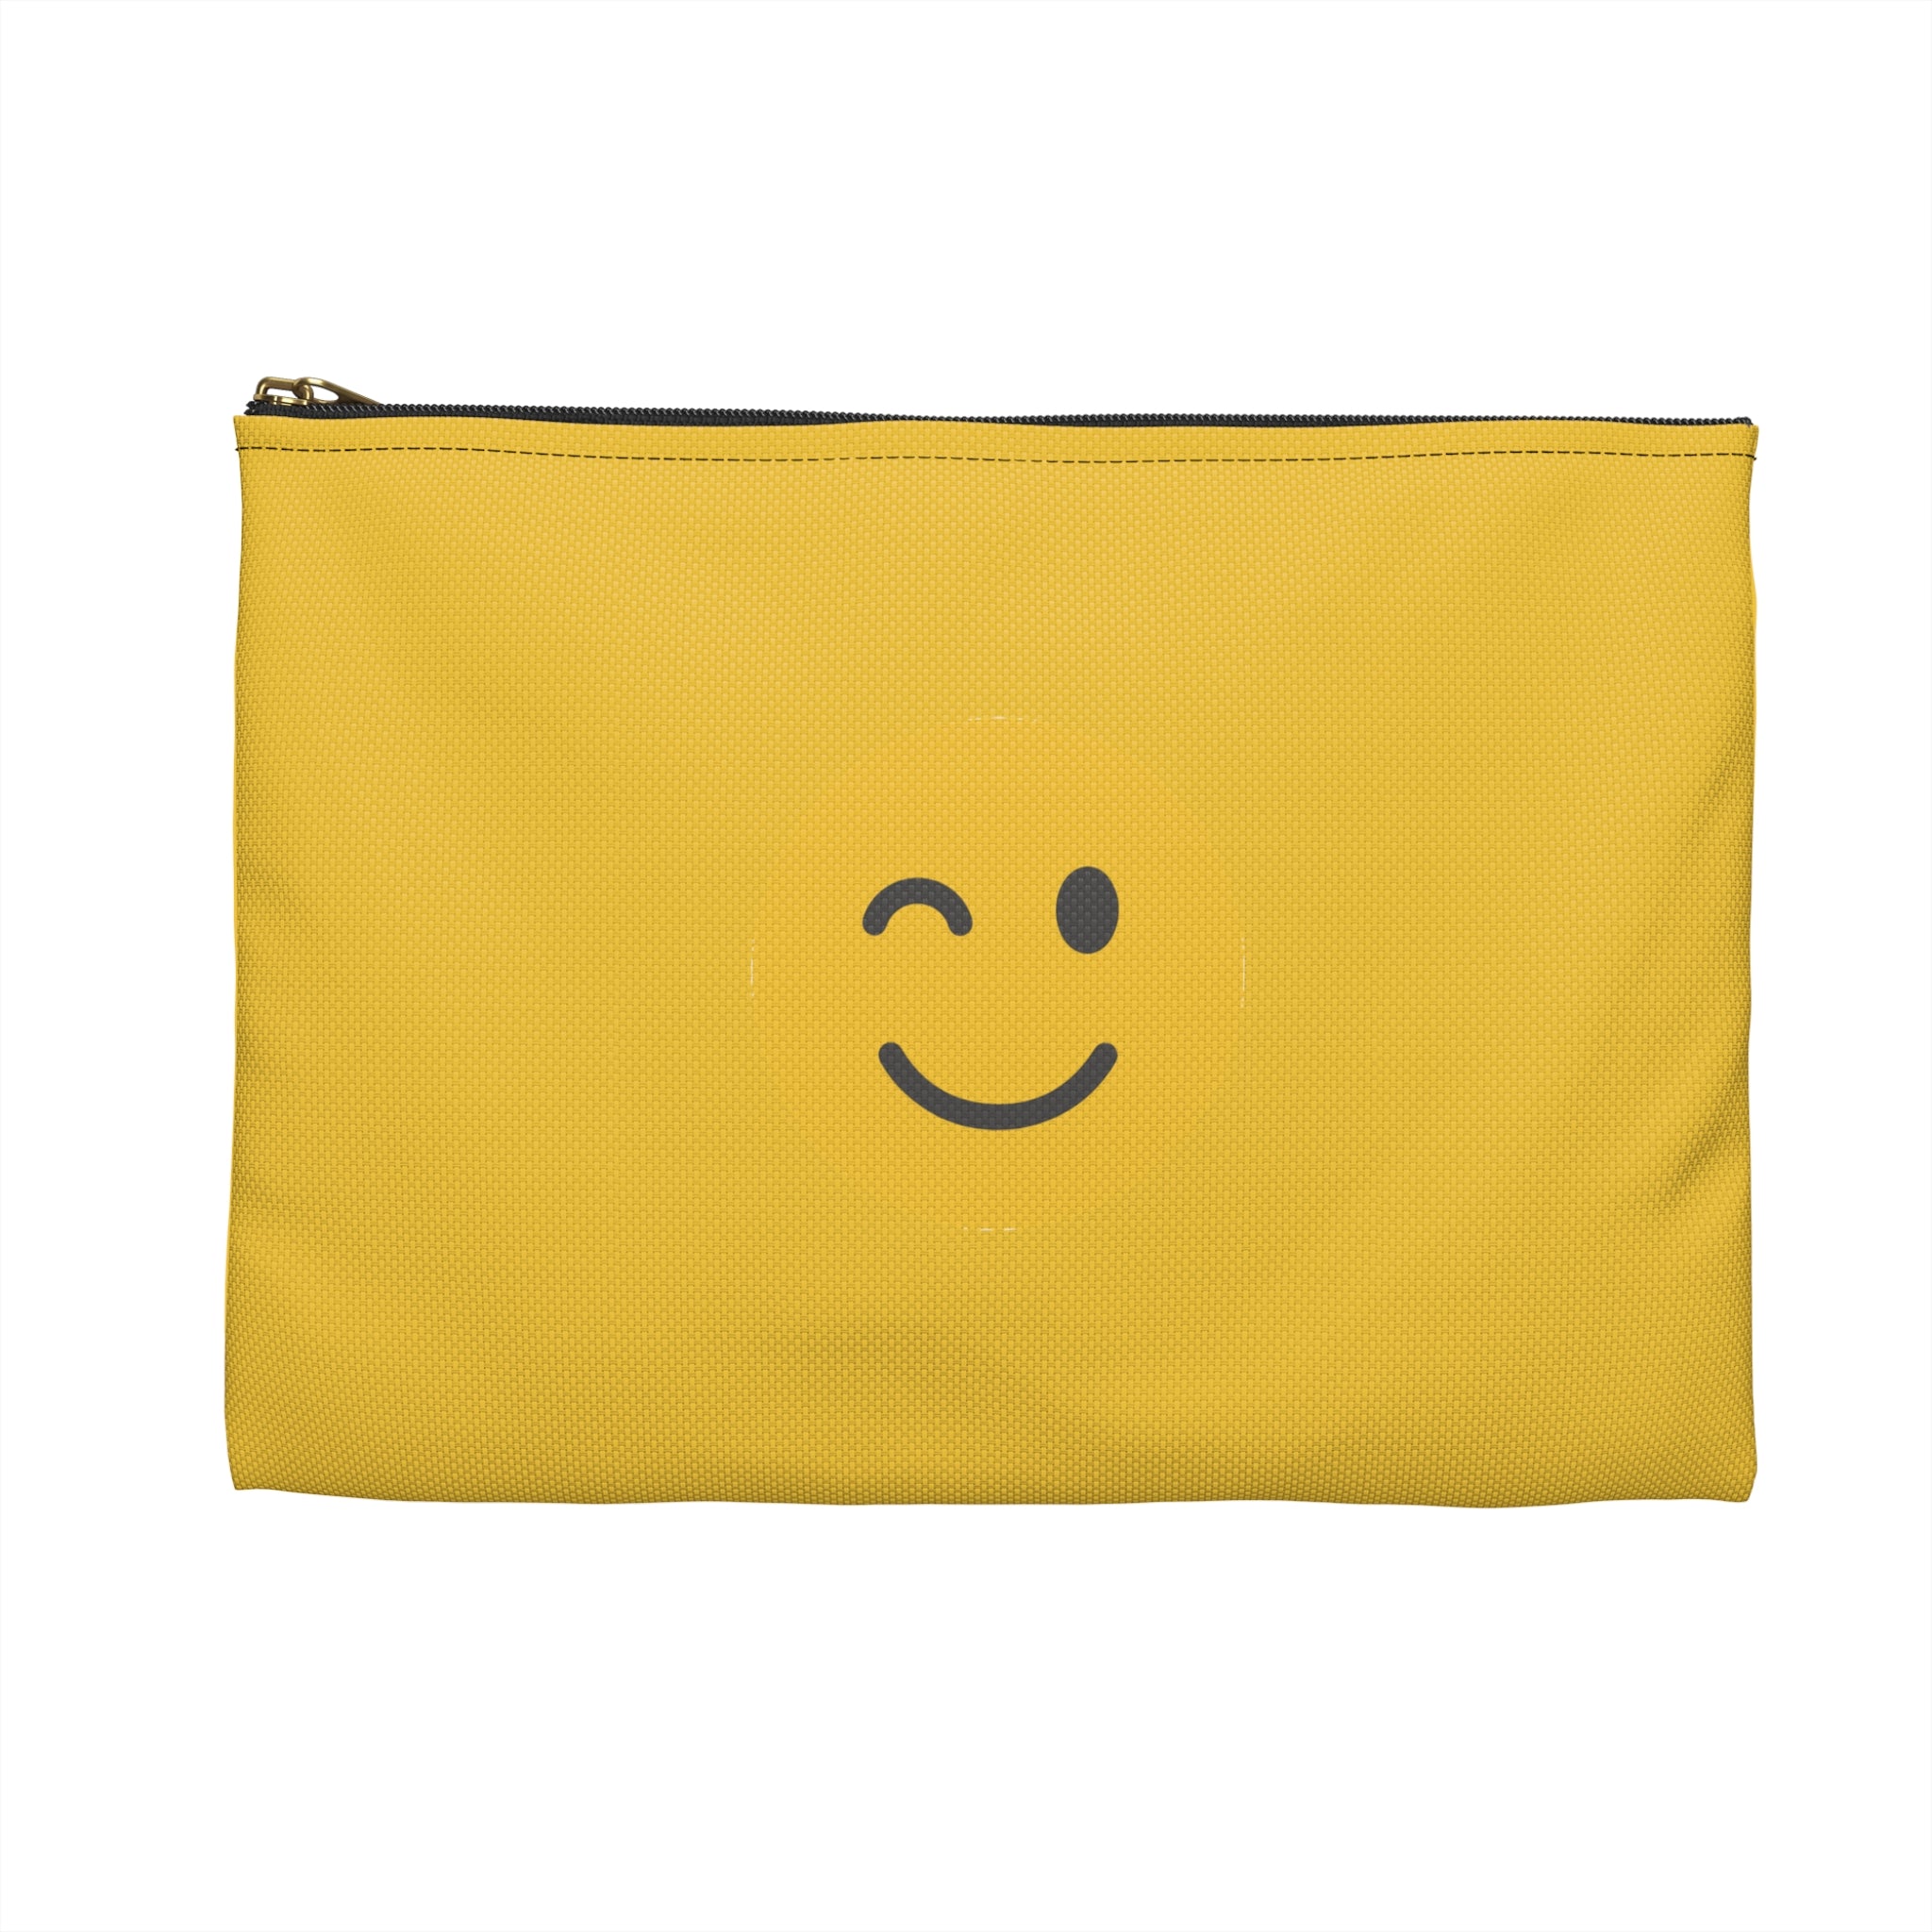 Her stuff Flat Pouch (Yellow)